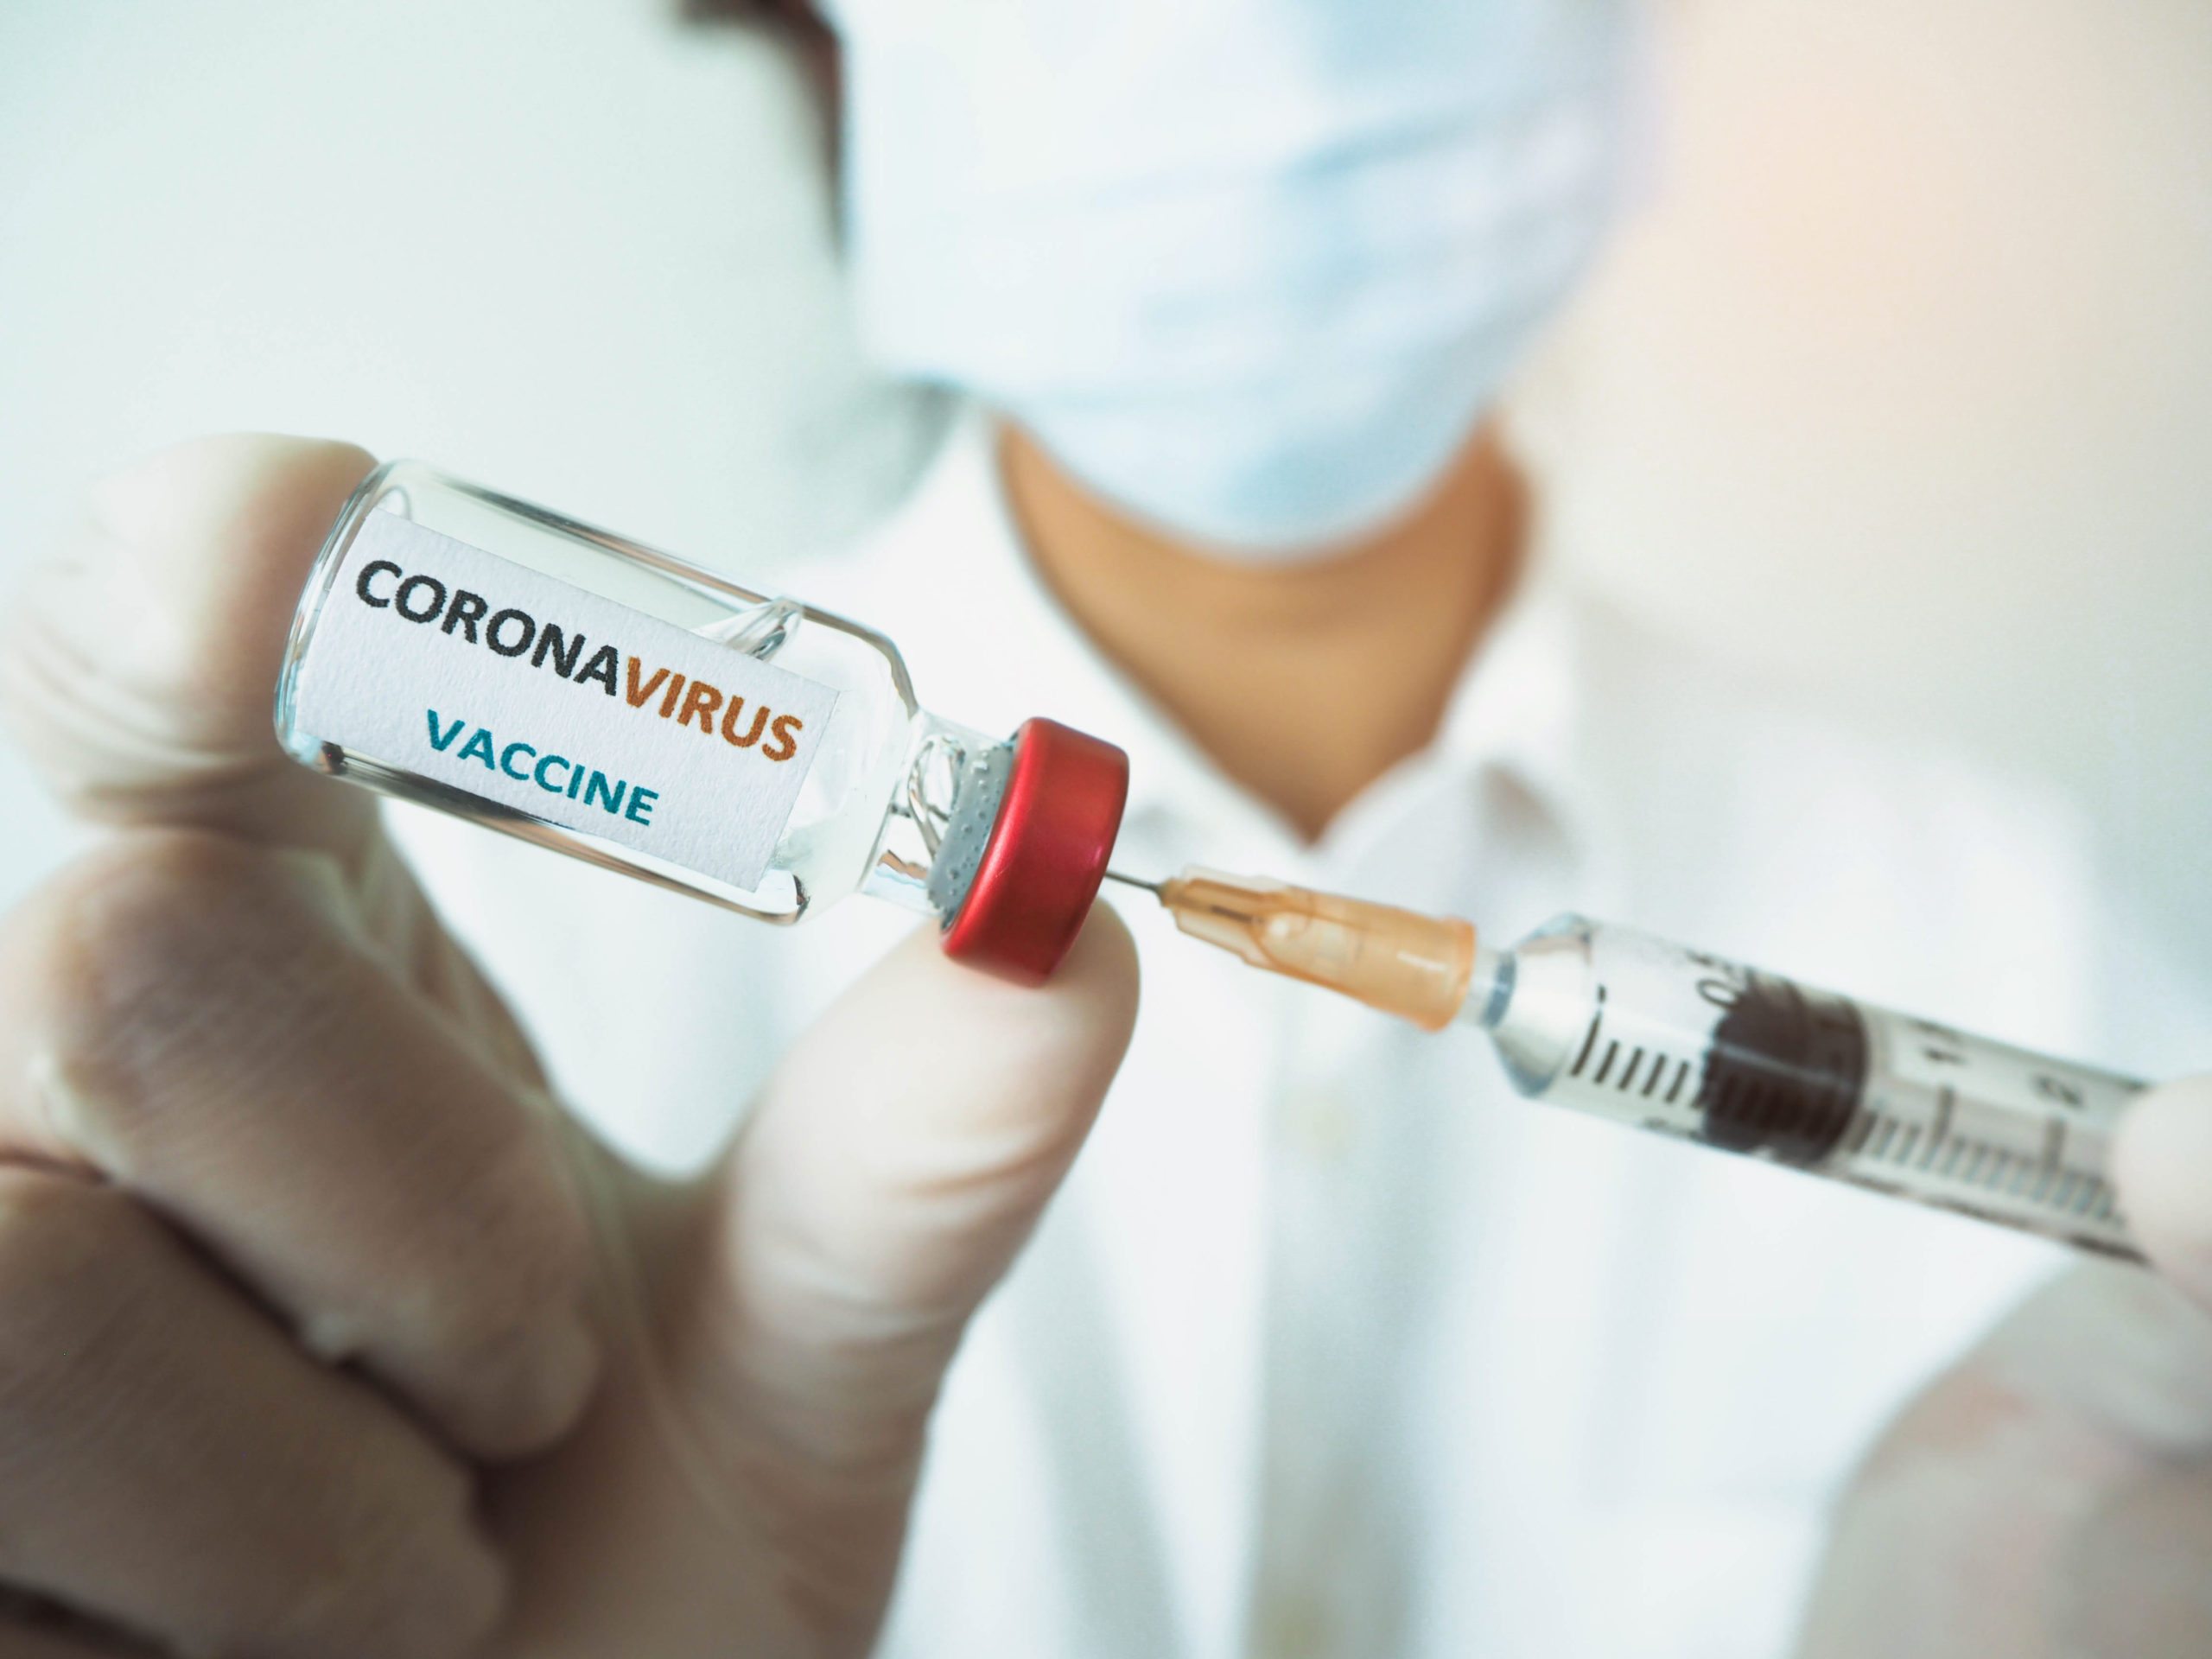 CAN EMPLOYERS REQUIRE EMPLOYEES’ PROOFS OF VACCINATION?